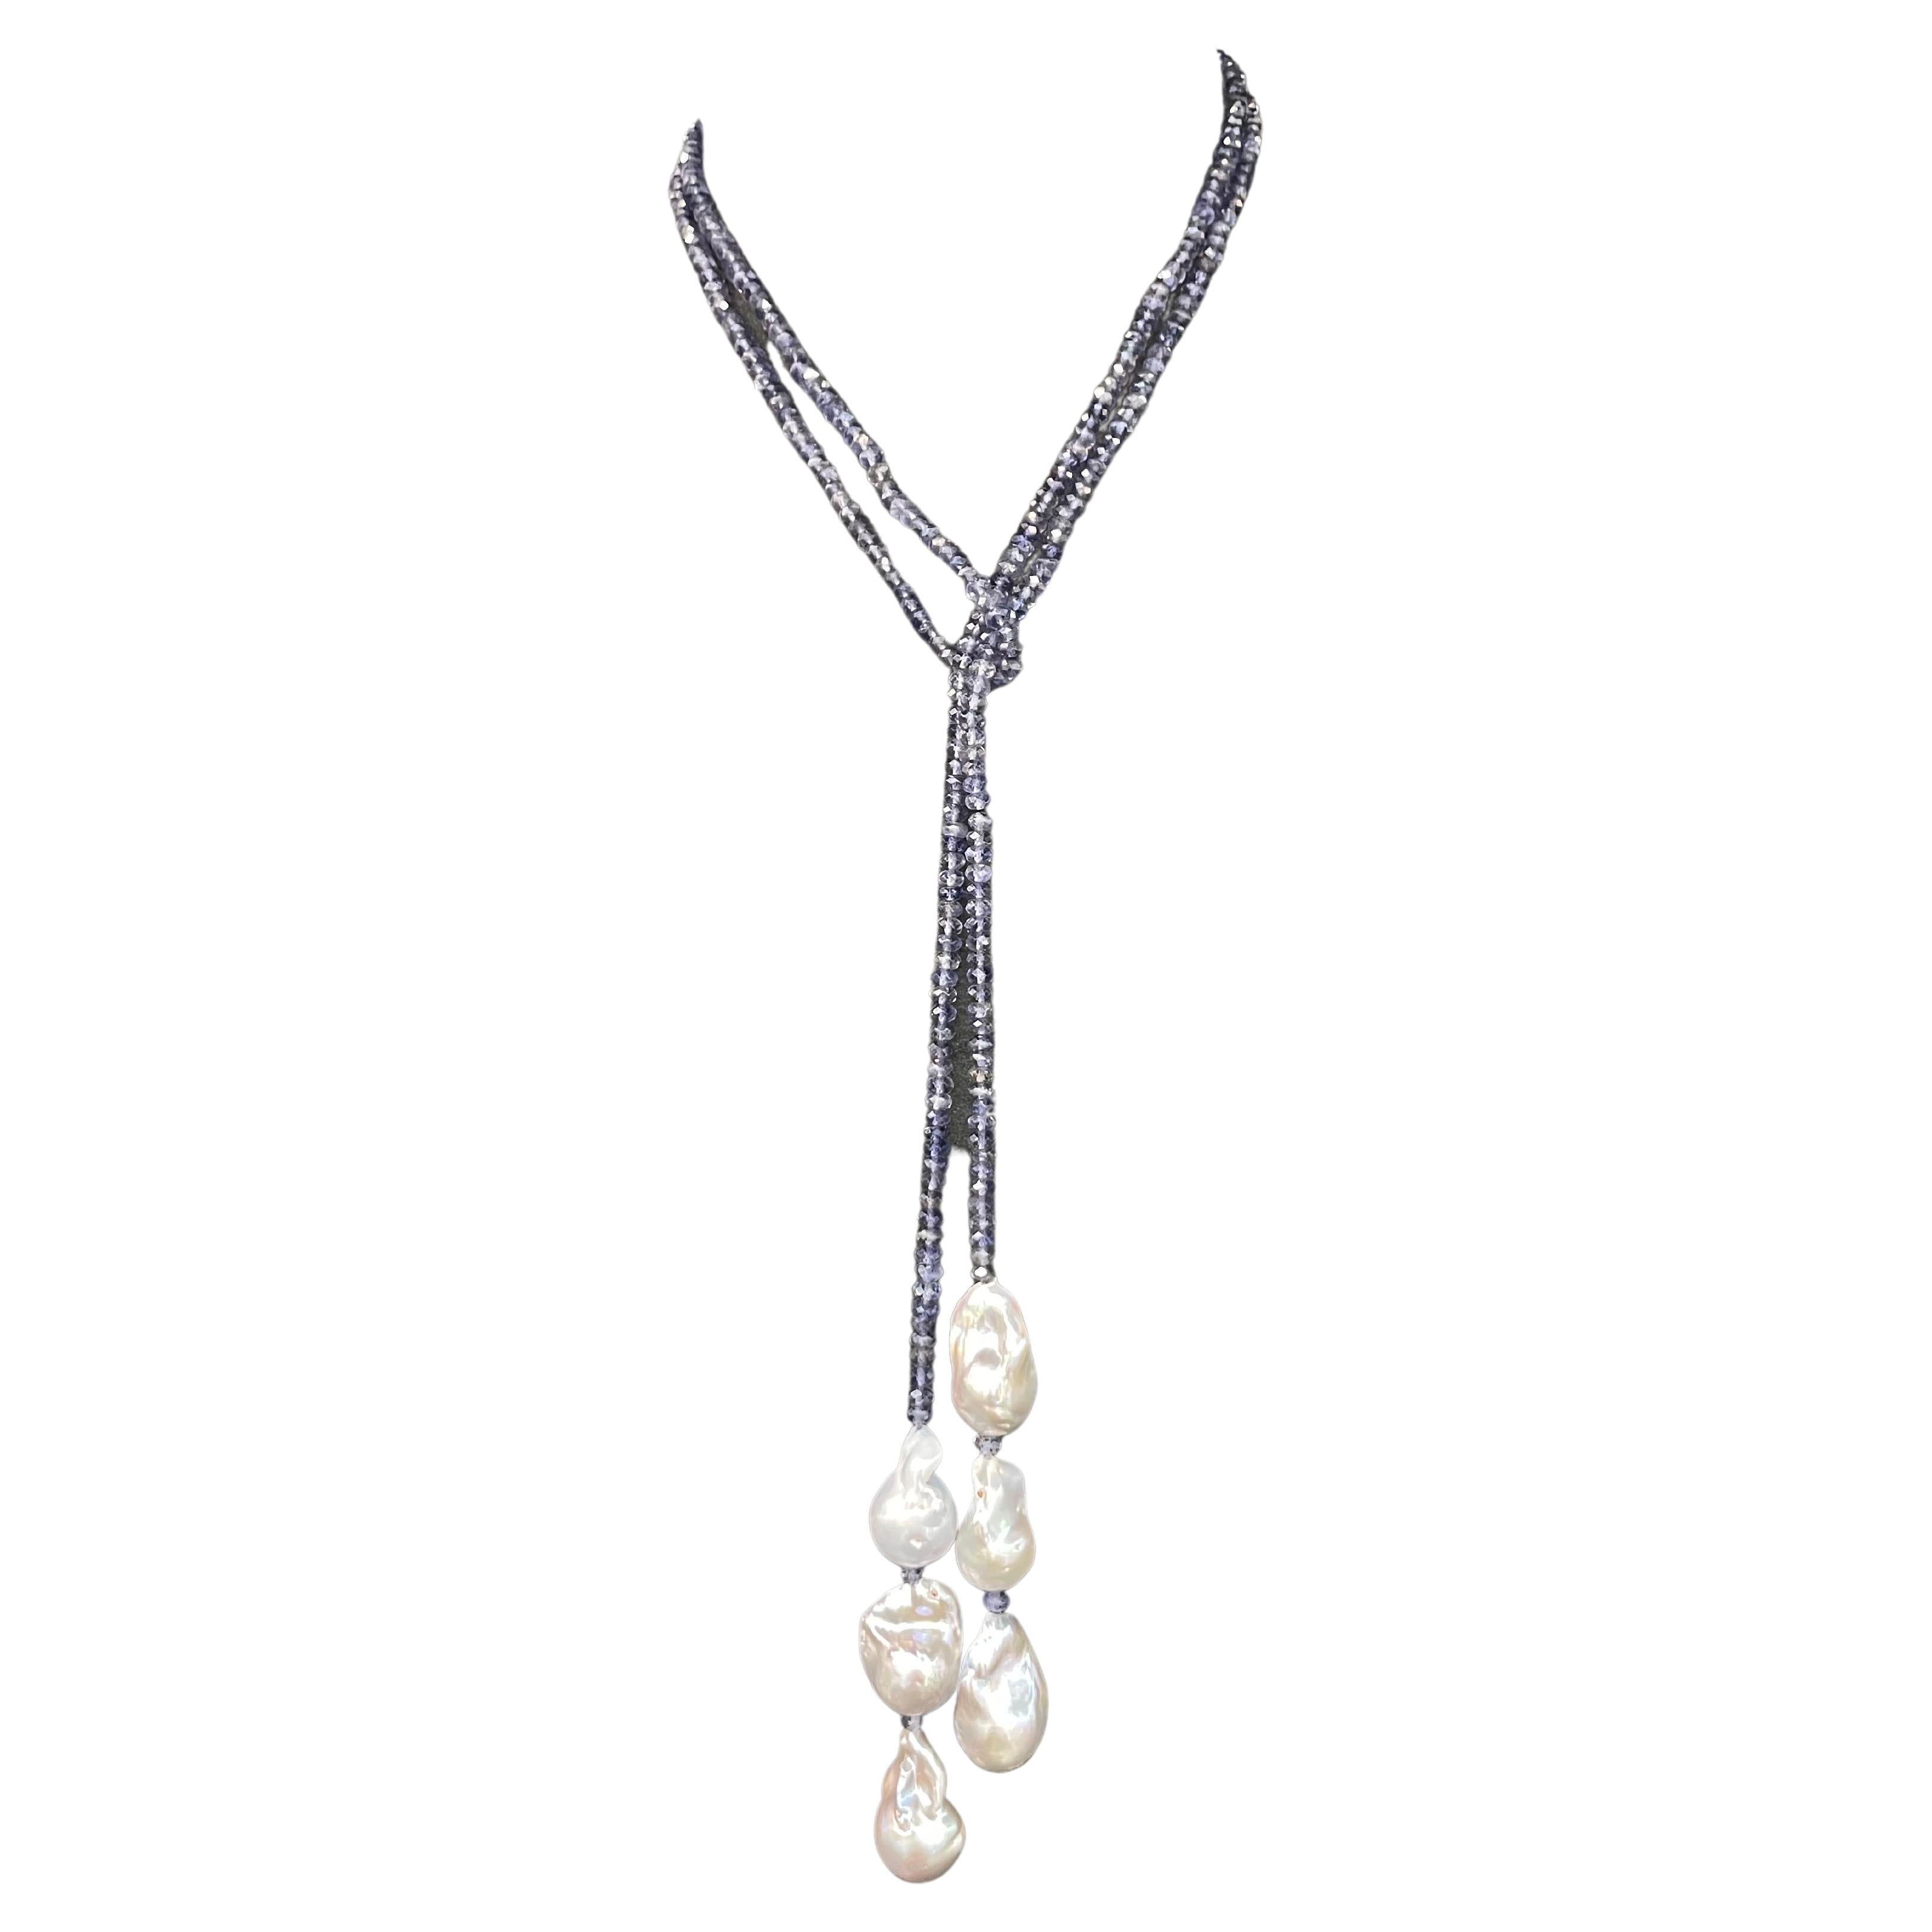 Strand of Iolite Grey Baroque Pearl Tassel Necklace 50 Inches Long For Sale